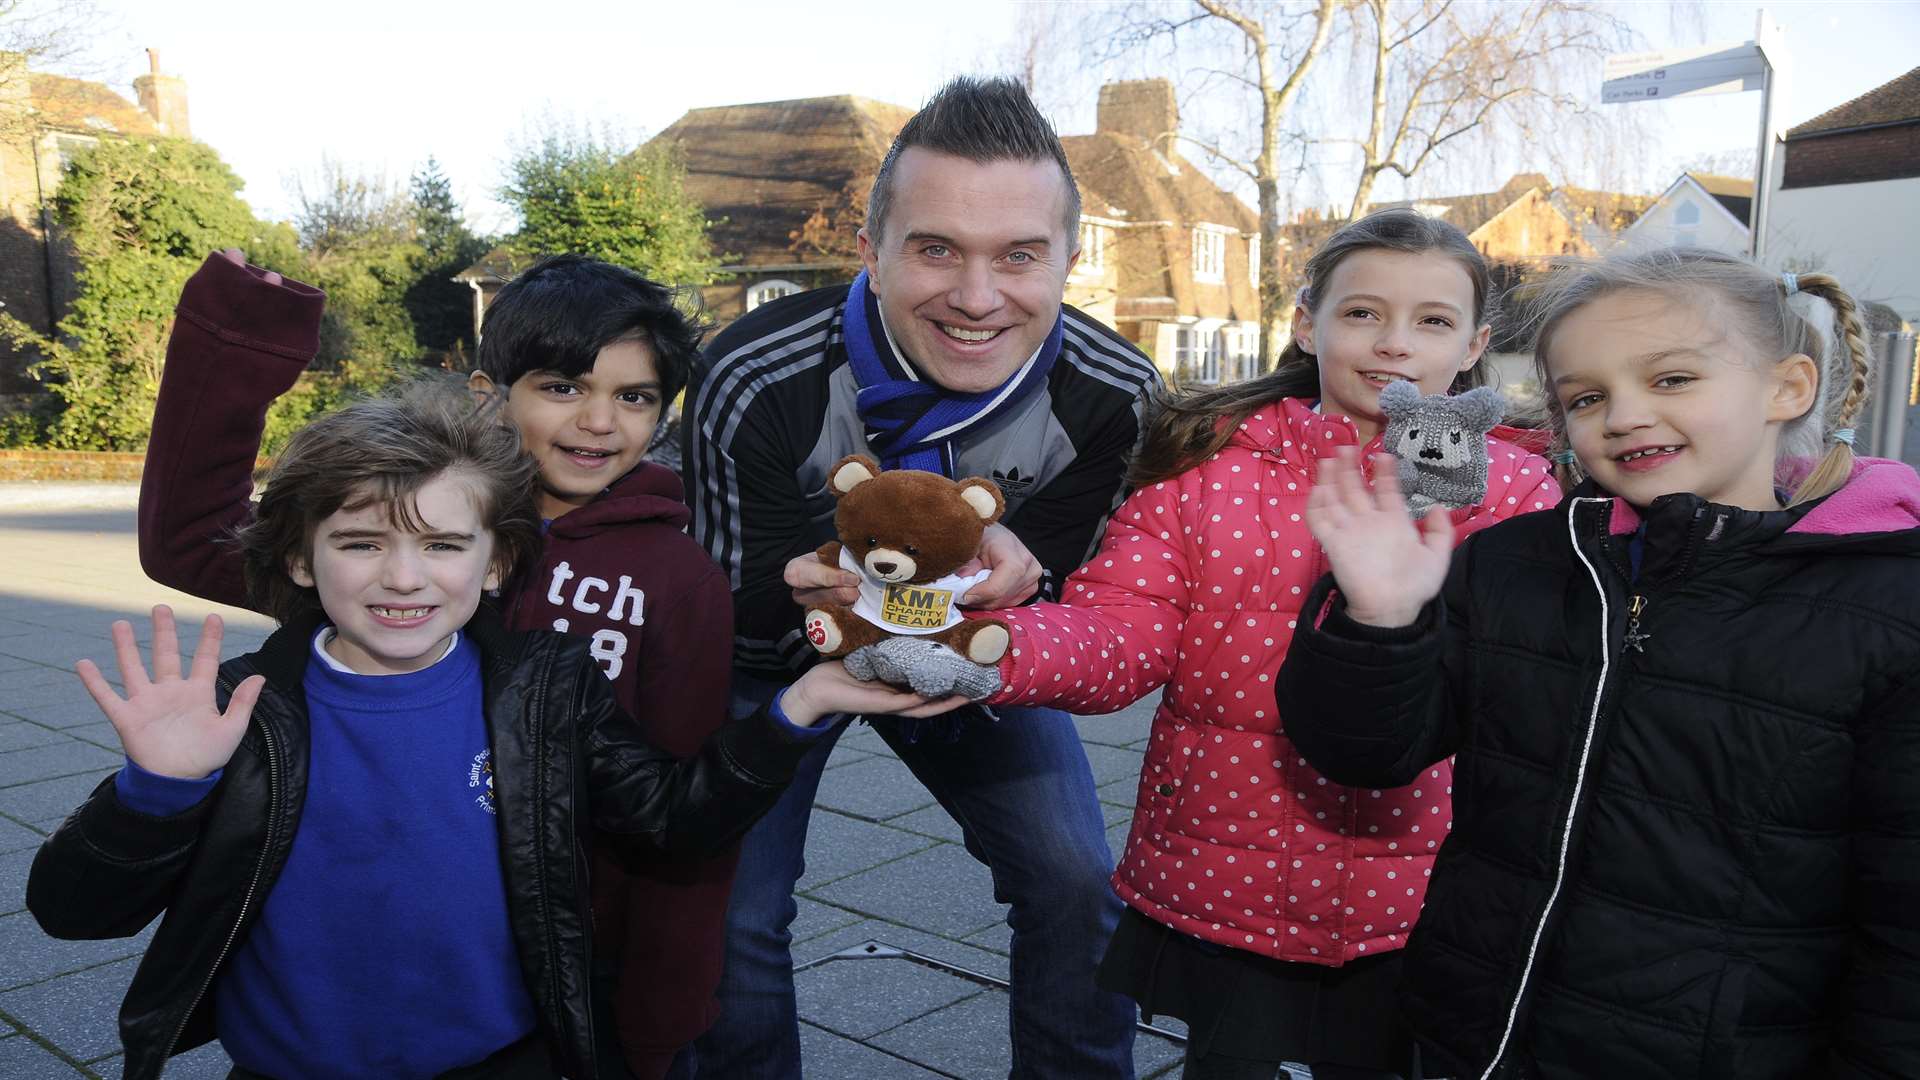 KM Charity Team mascot Ted the bear with Phil Gallagher (star of CBeebies' Mister Maker), Raphael, seven, Salem, six, Megan, seven, and Alice, seven, from St Peter's Methodist School in Canterbury.